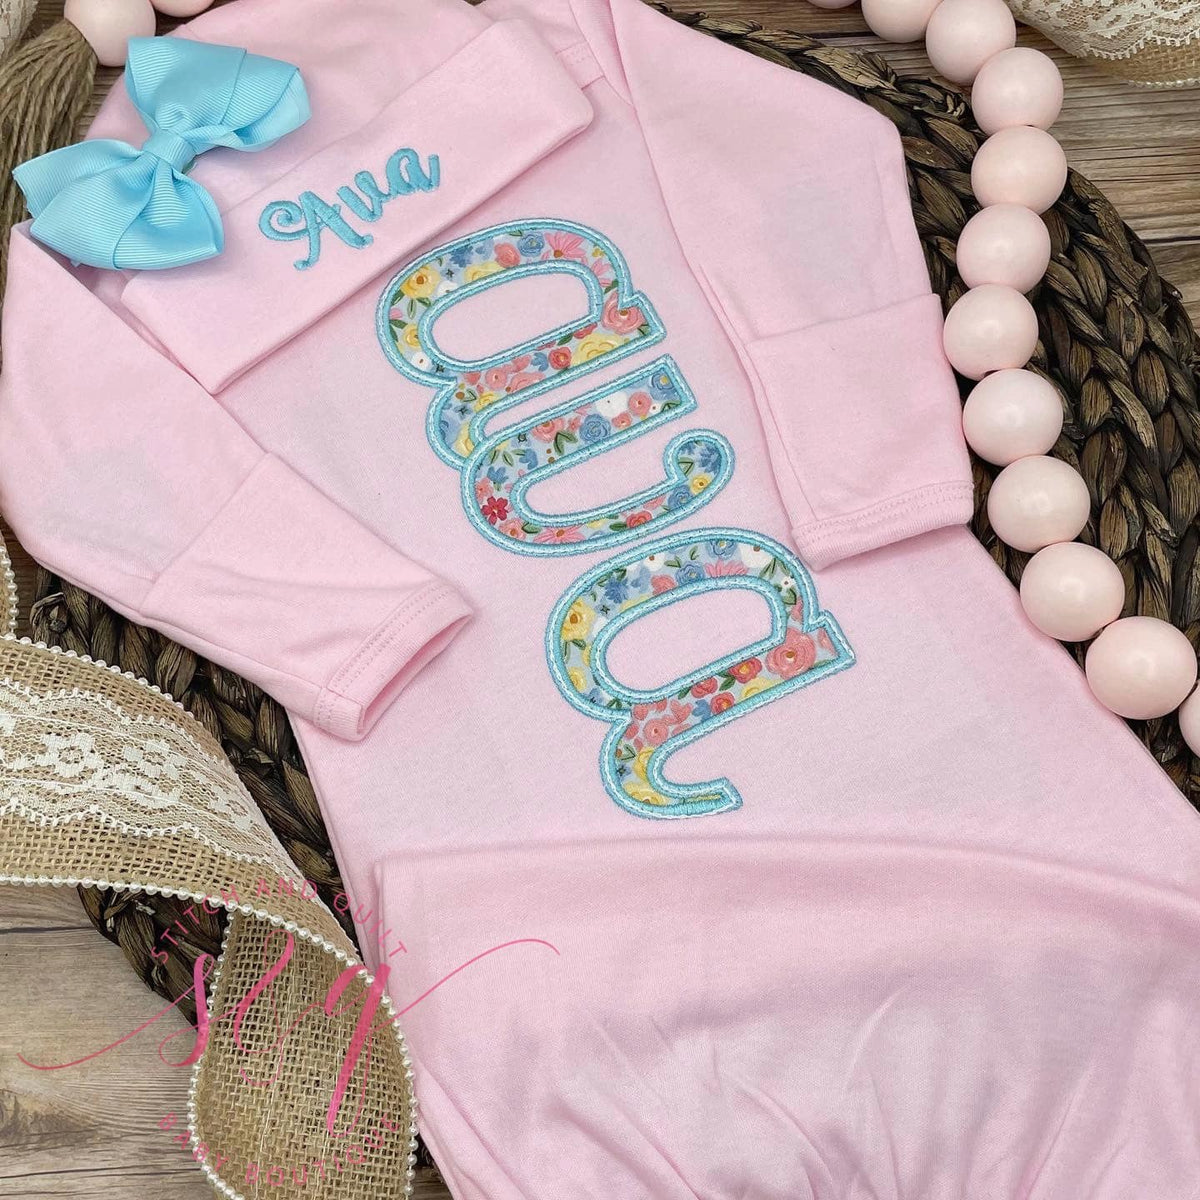 Newborn Girl coming home set pink and blue, Take Home Outfit, Girl coming home set